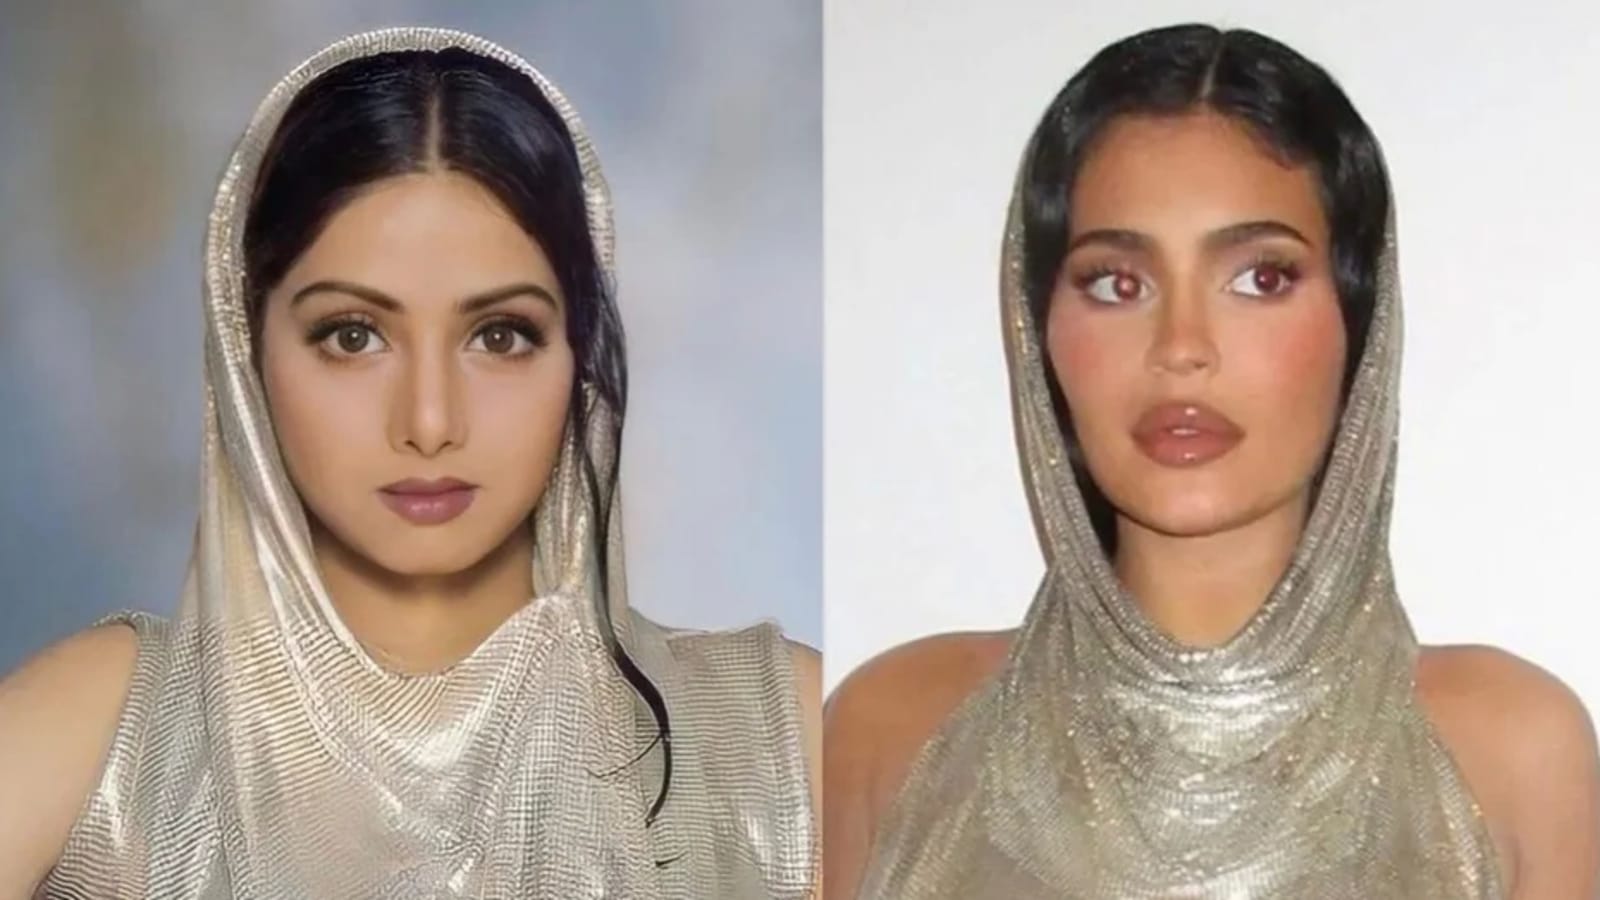 Shridevi Ki Sexi Xvideos - Sridevi fans are convinced Kylie Jenner 'copied' her look from 1990. See  pics | Bollywood - Hindustan Times